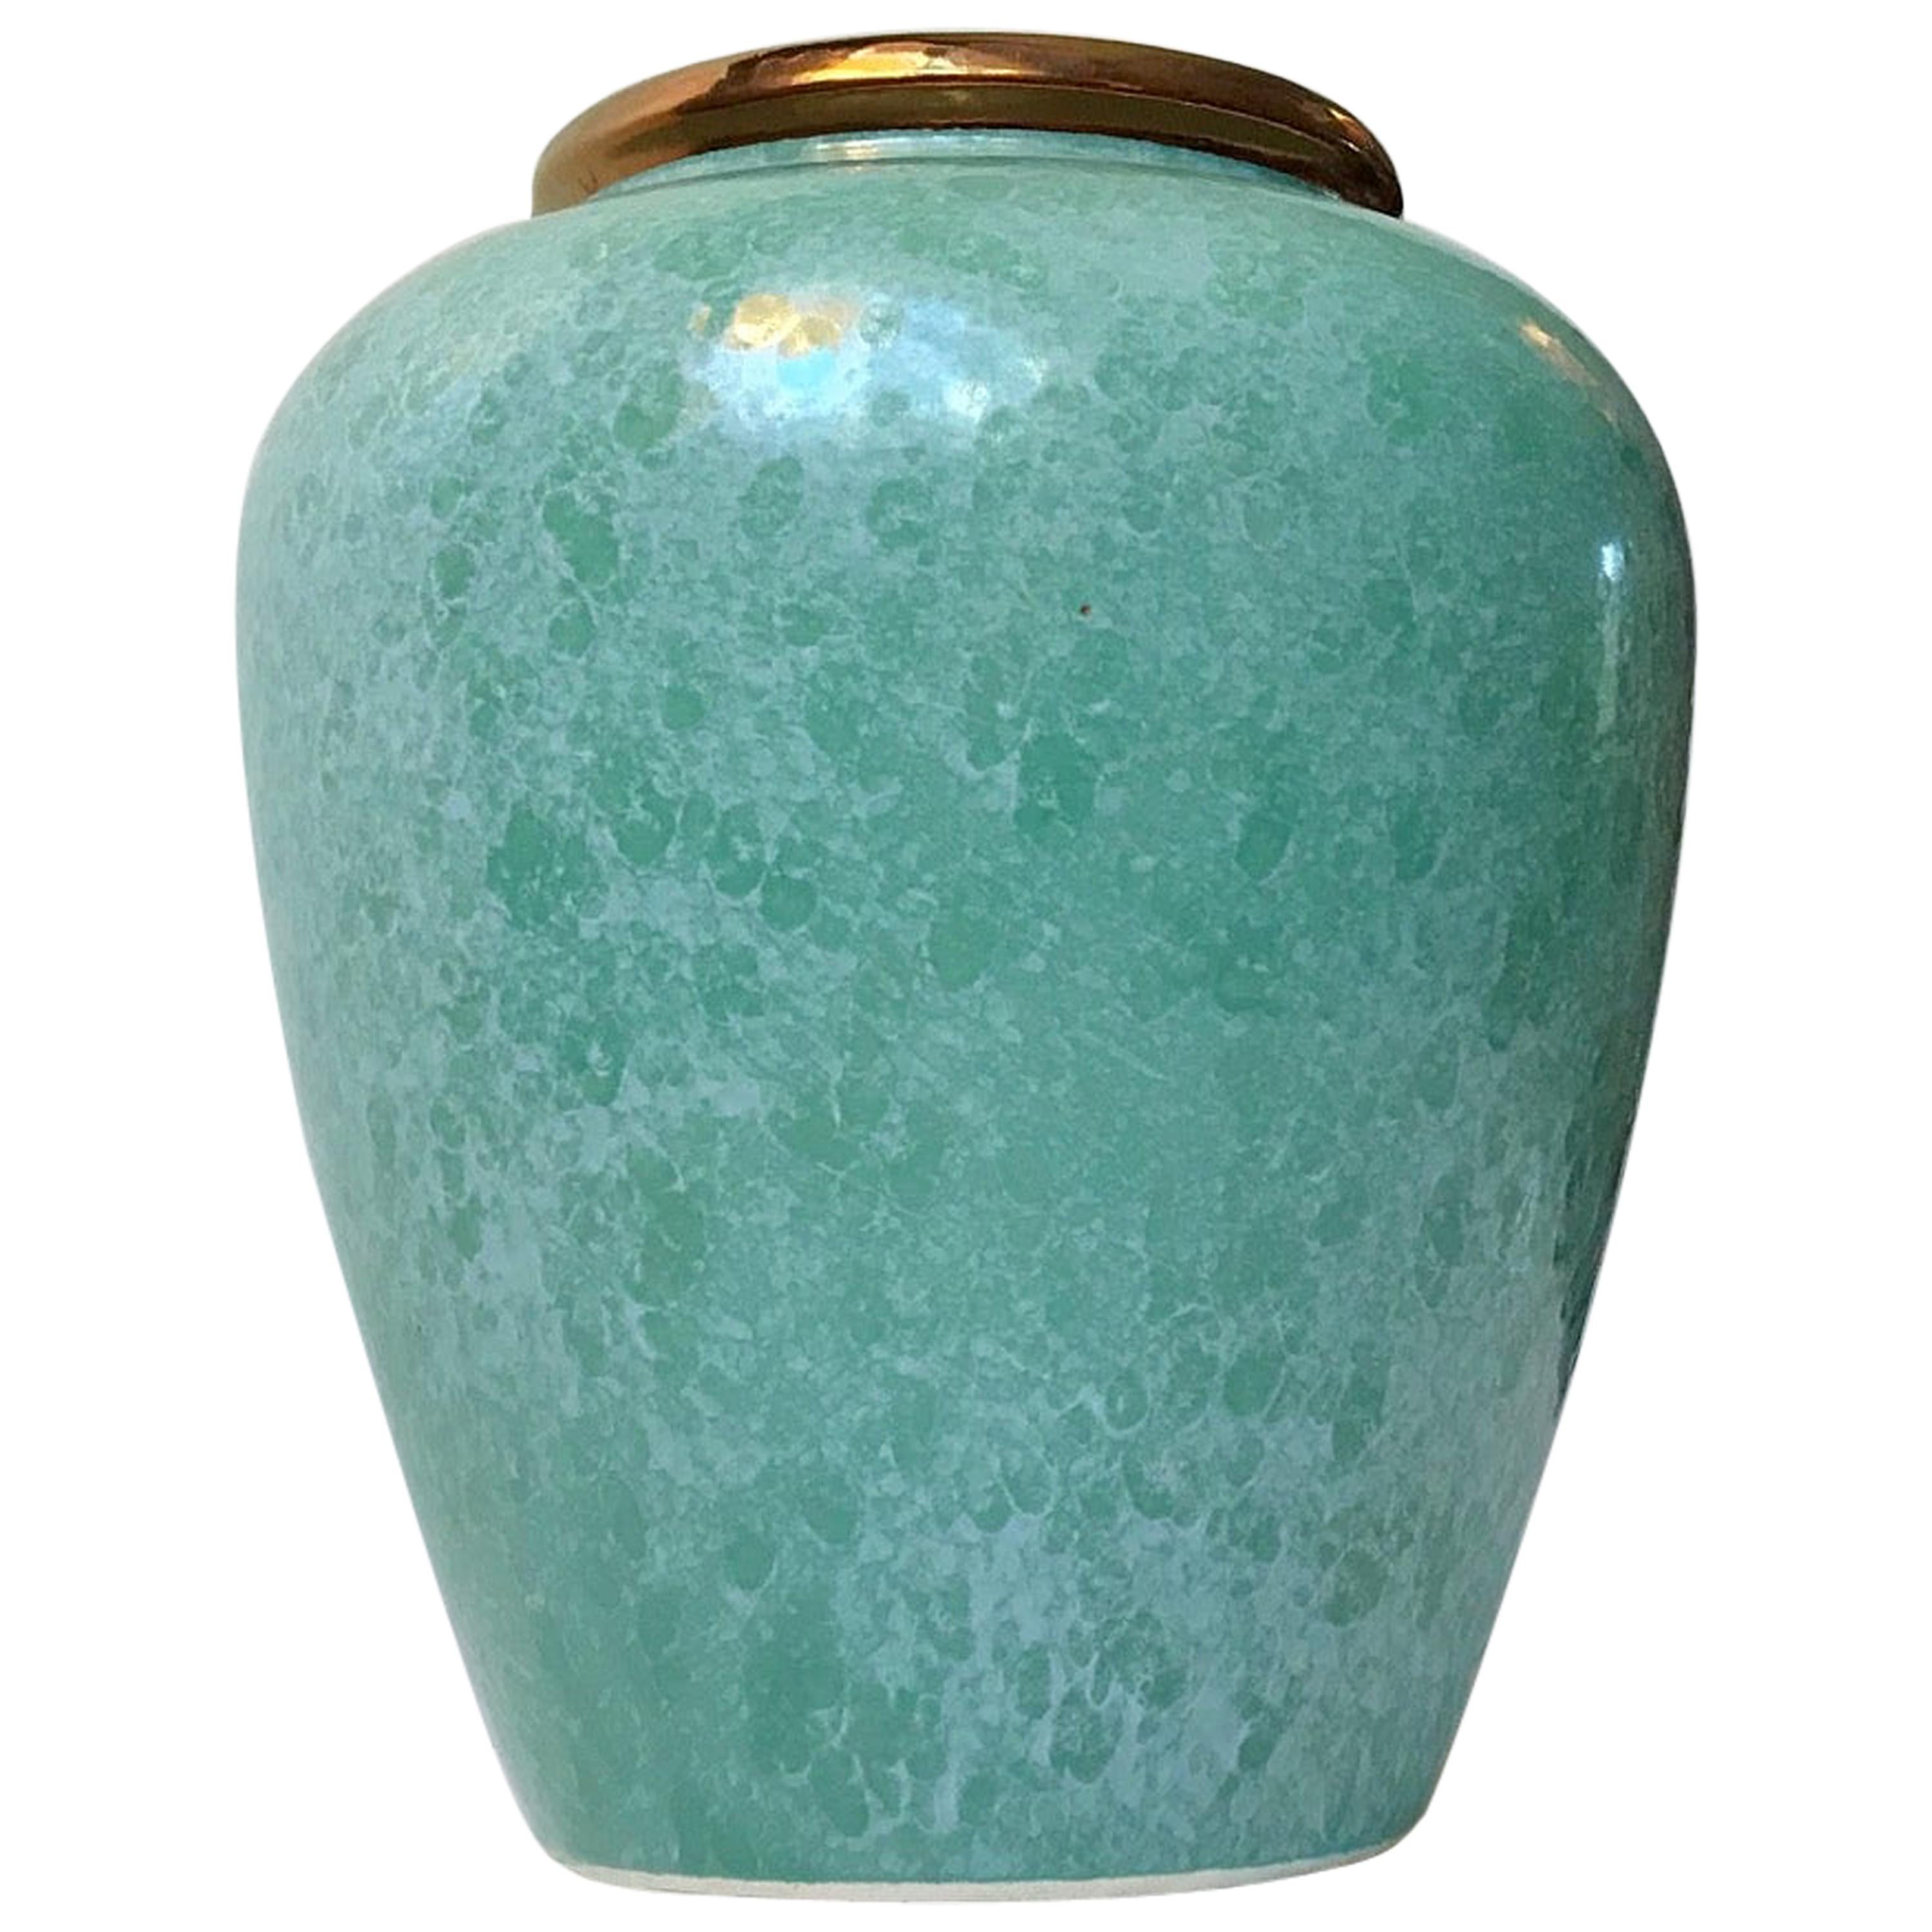 Scandinavian Pottery Urn with Speckled Green Glaze, 1970s